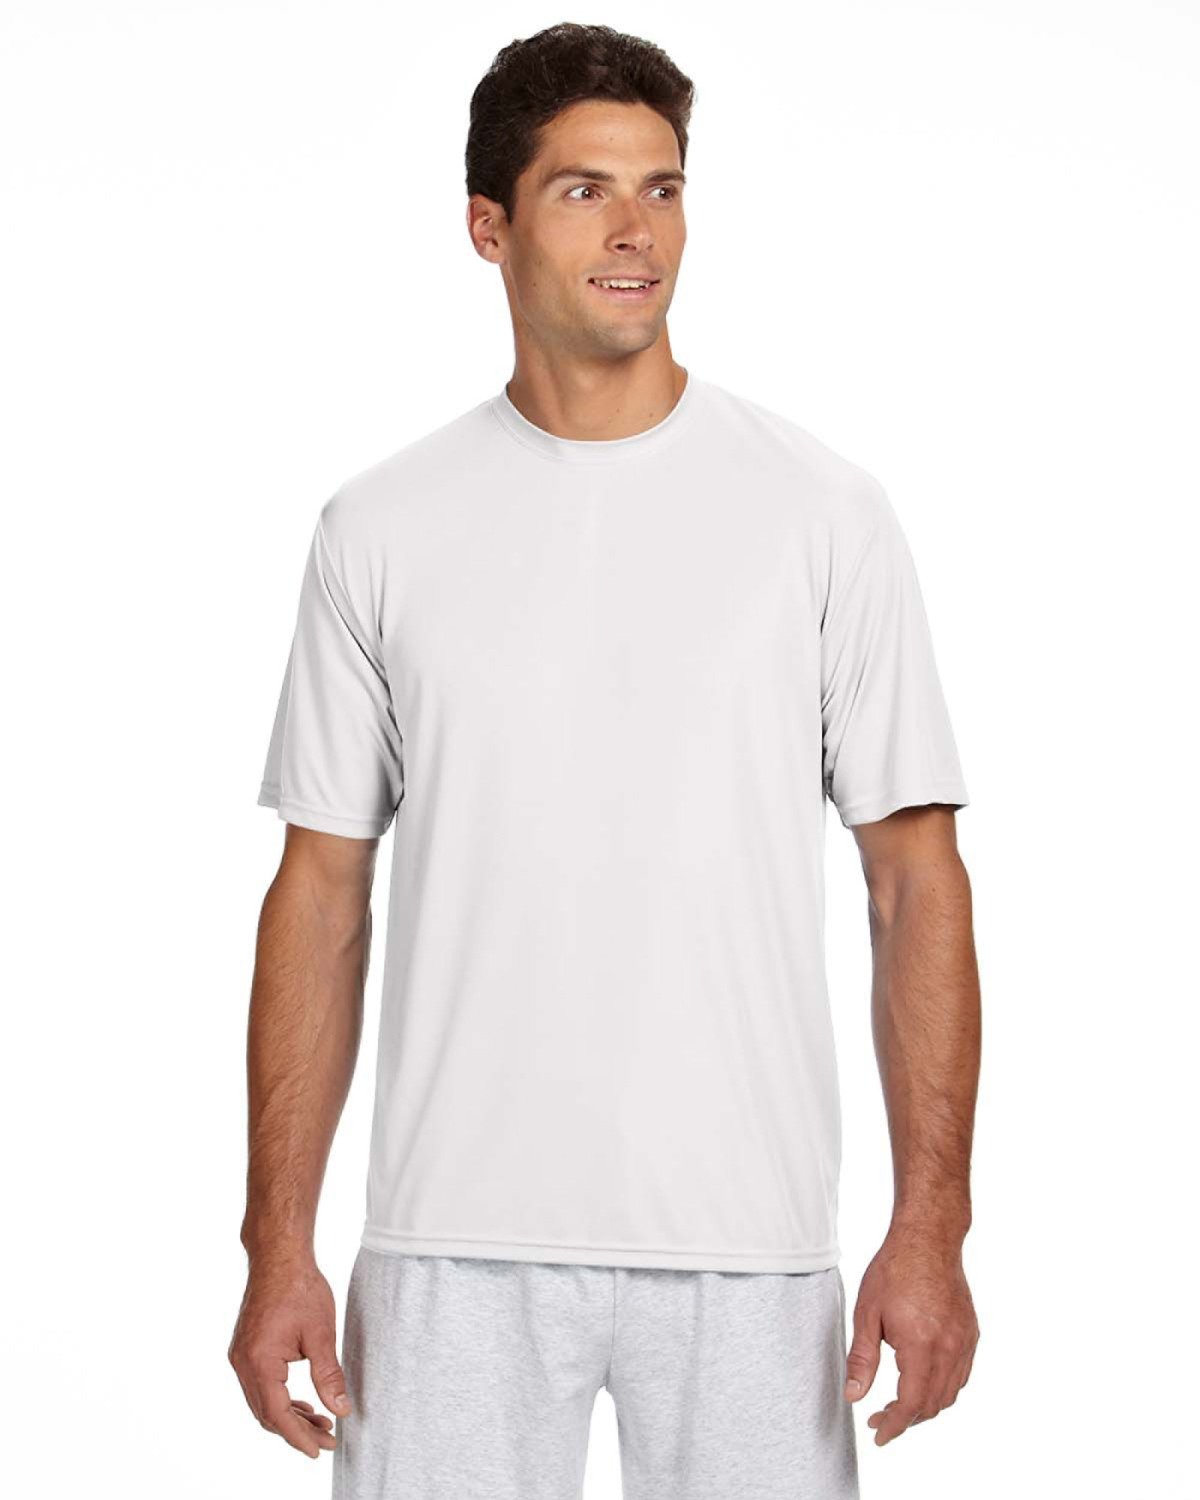 A4 Men's Cooling Performance T-Shirt WHITE 